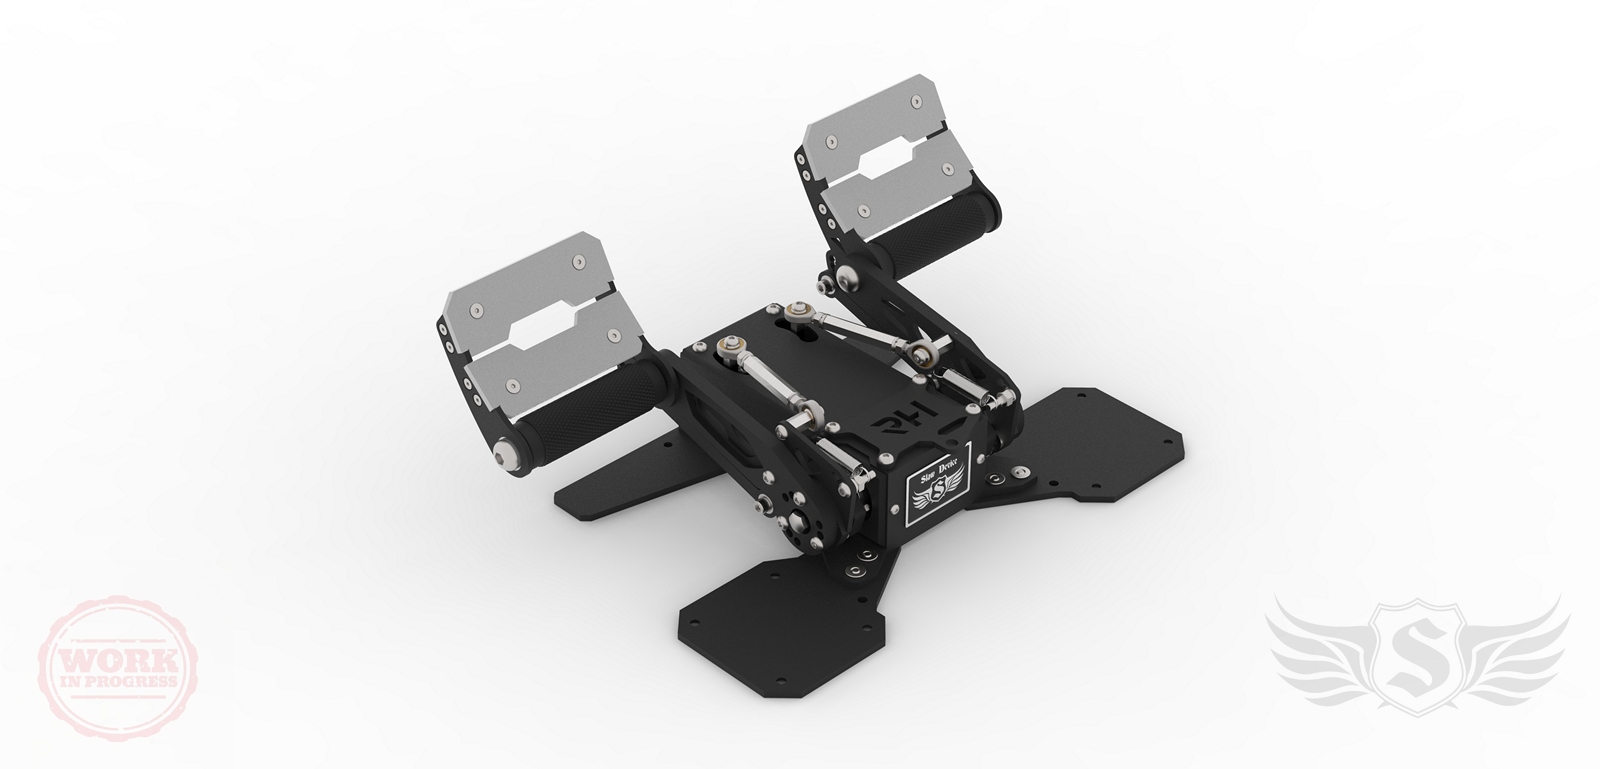 Slaw Device RH "Rotor" rudder pedals - Input Devices - ED Forums